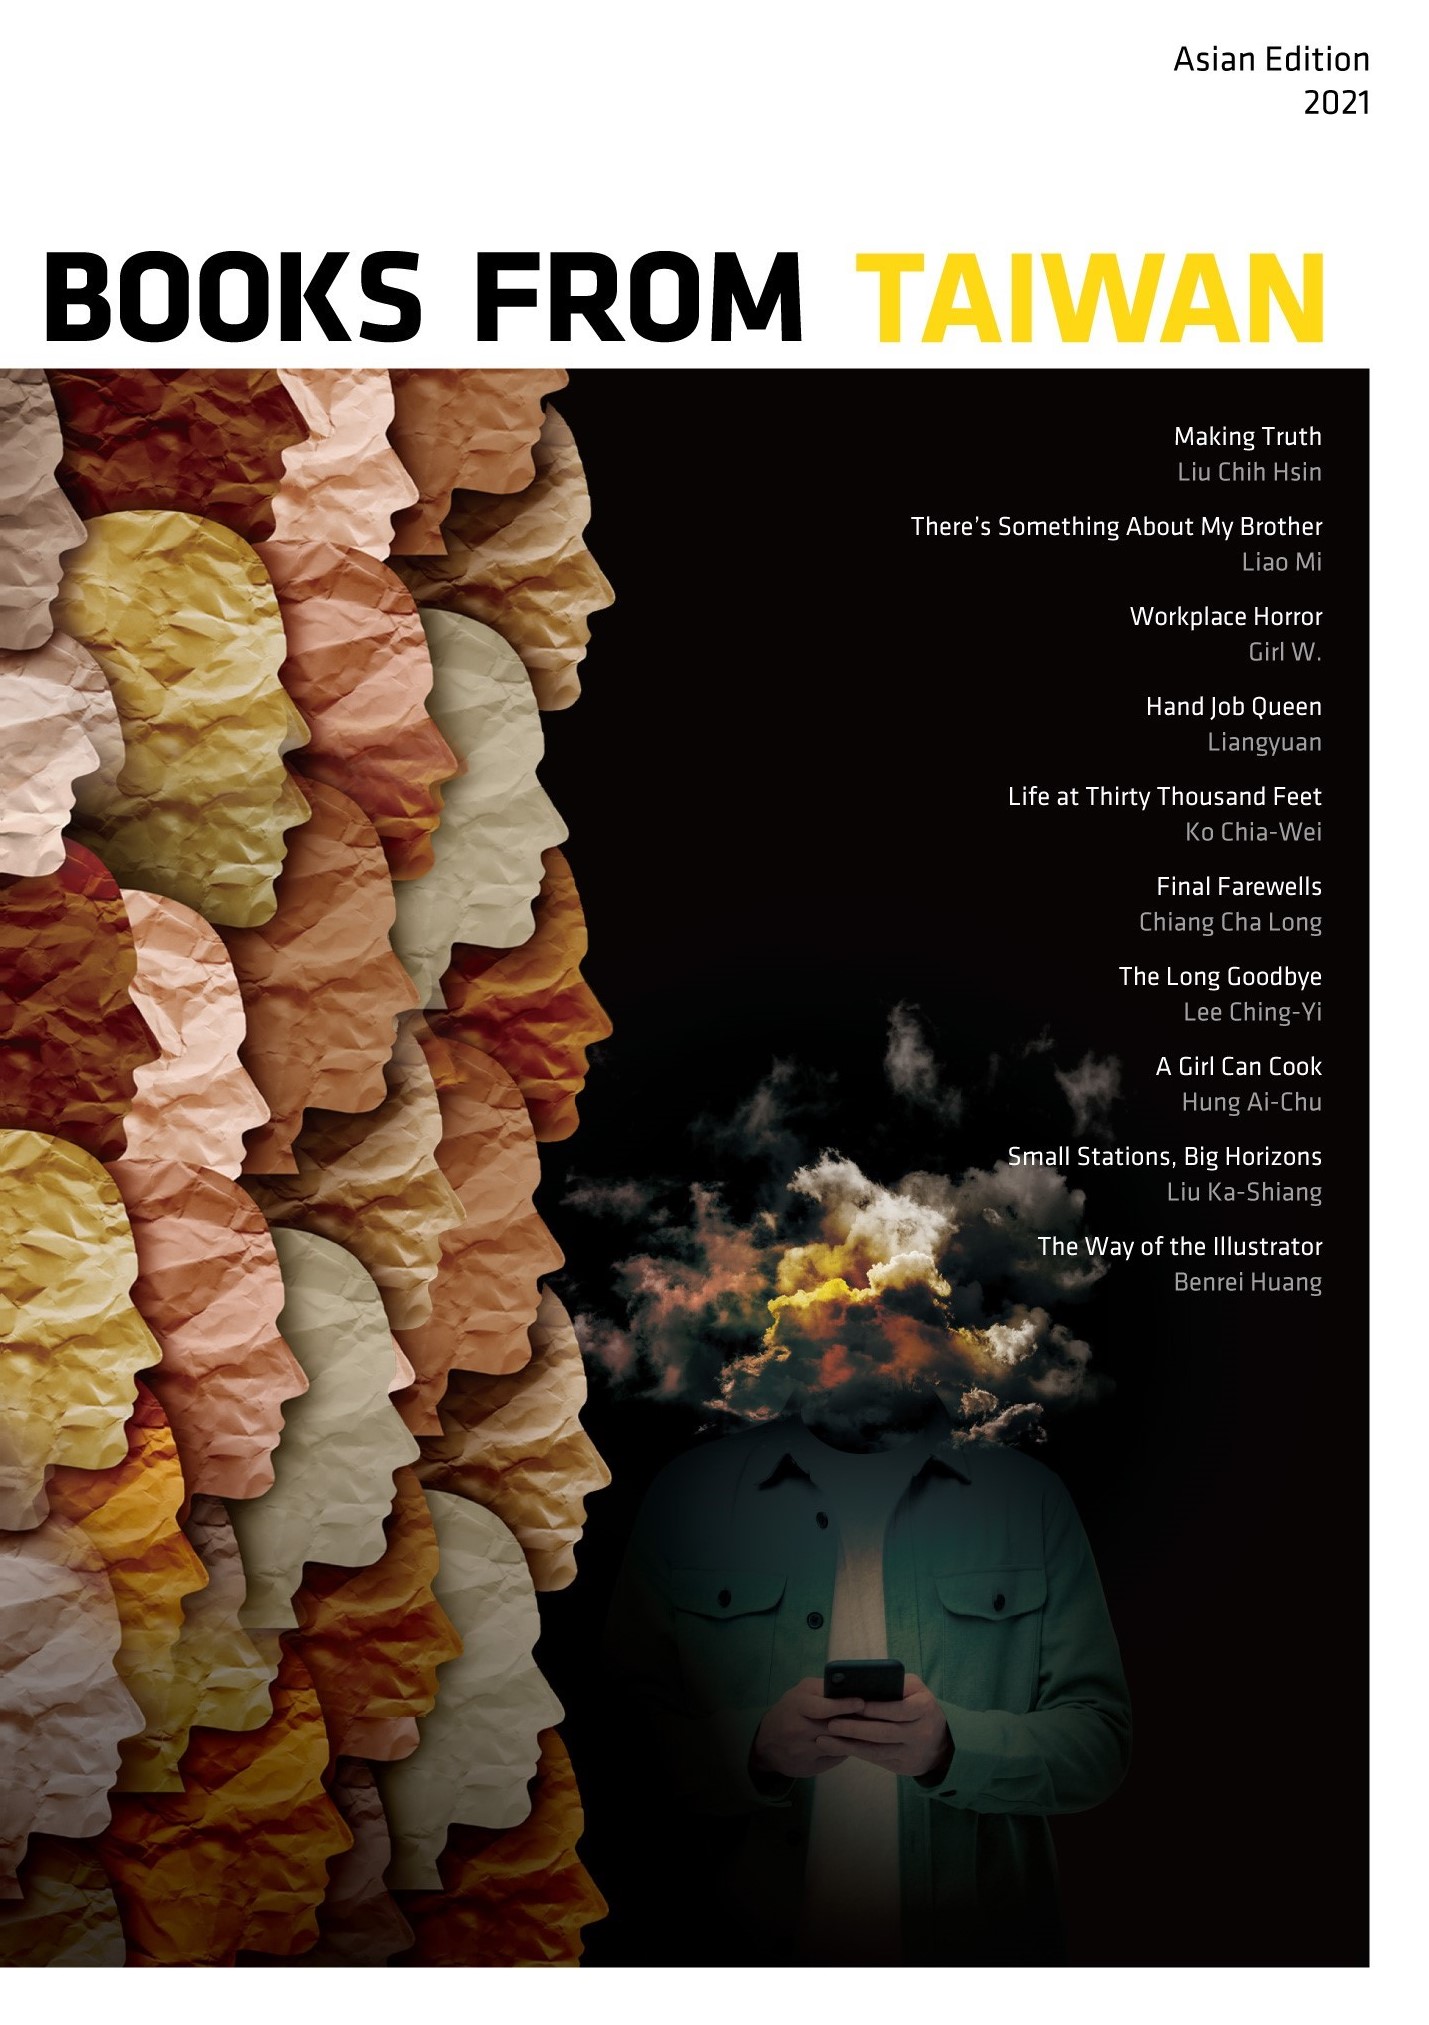 Books from Taiwan Asian Edition 2021